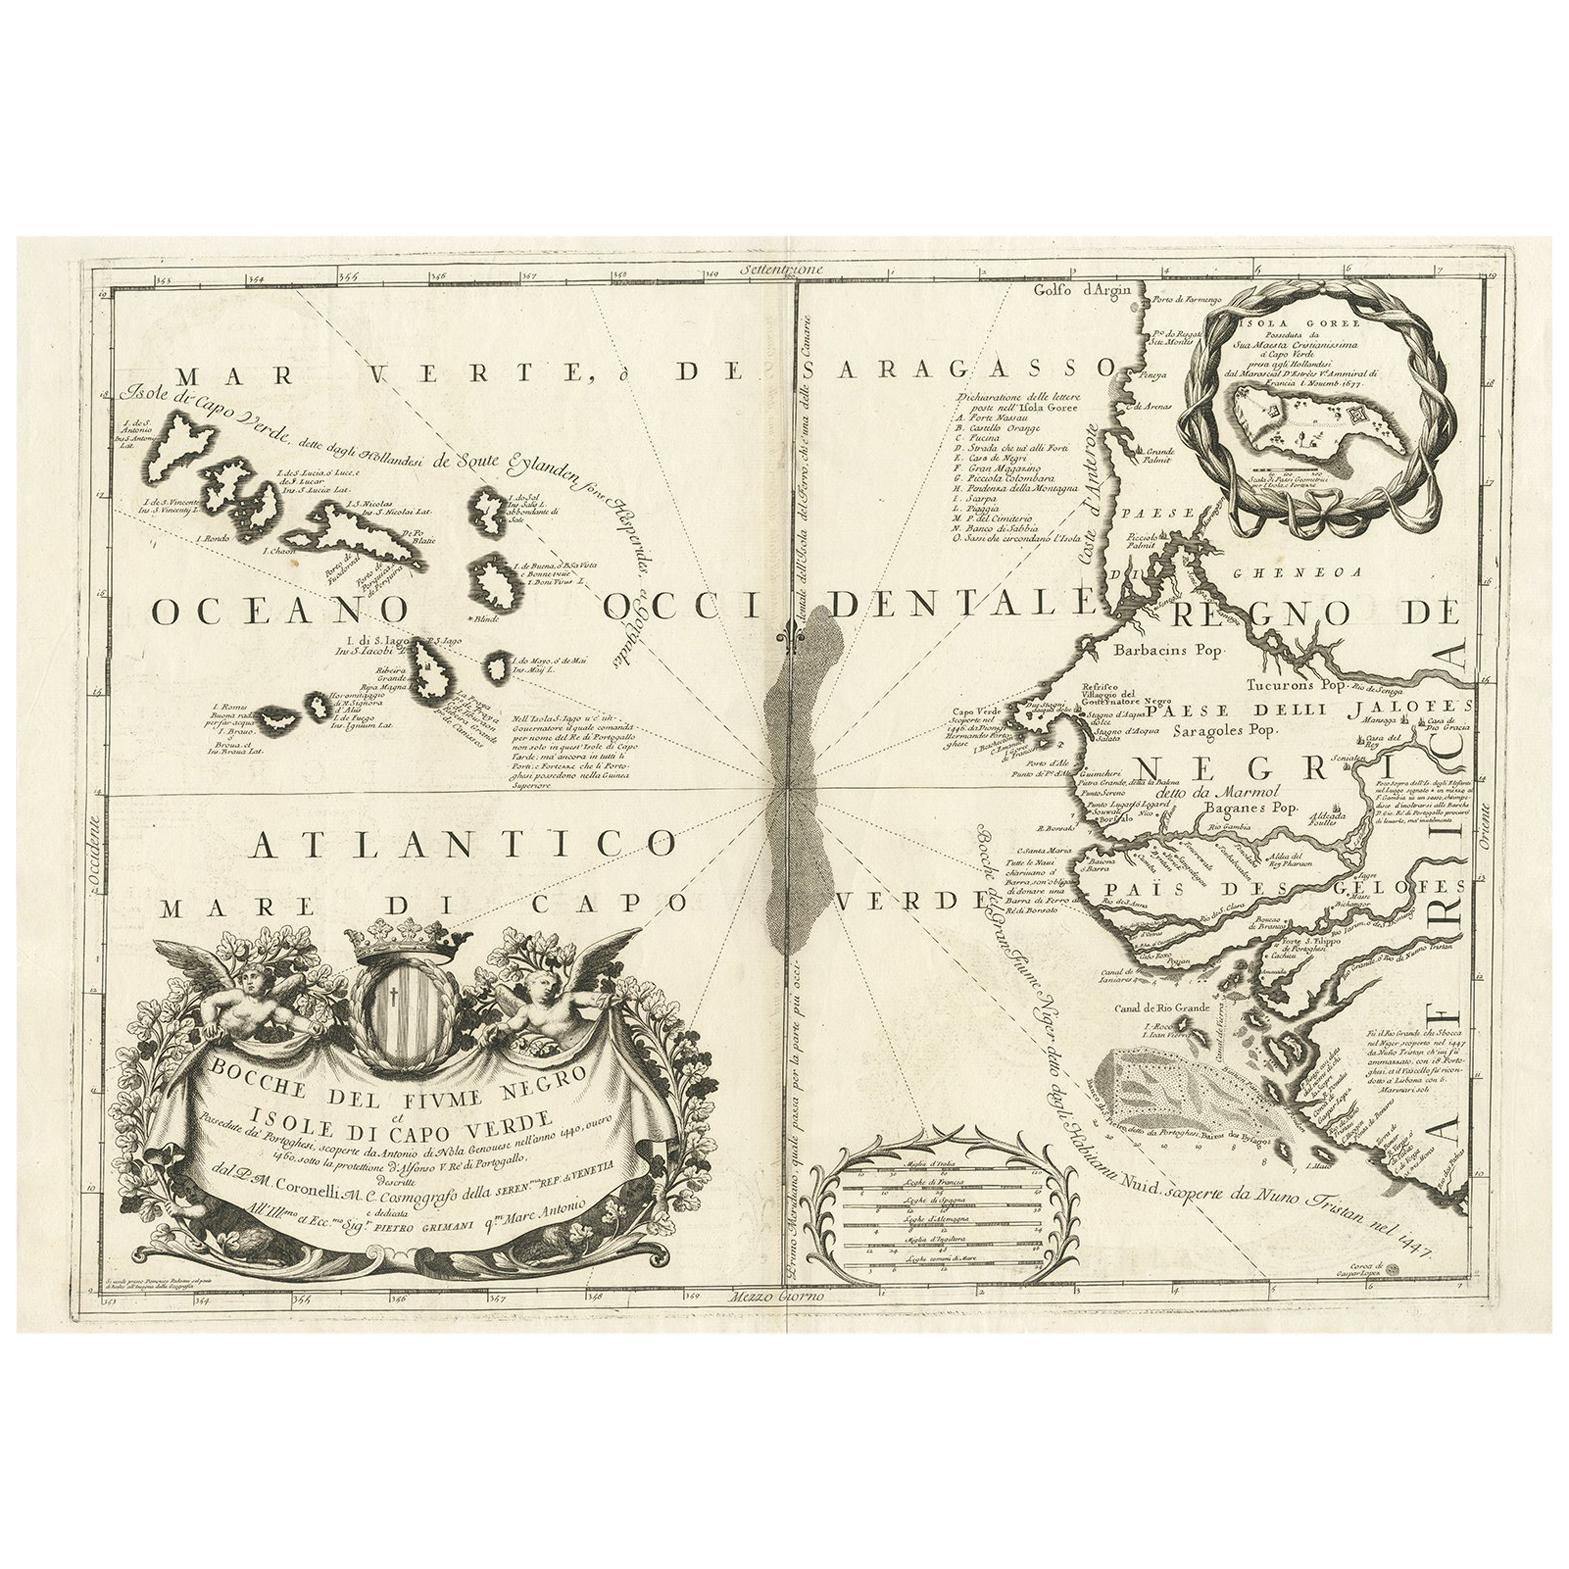 Antique Map of Western Africa and the Cape Verde Islands by Coronelli, 1691